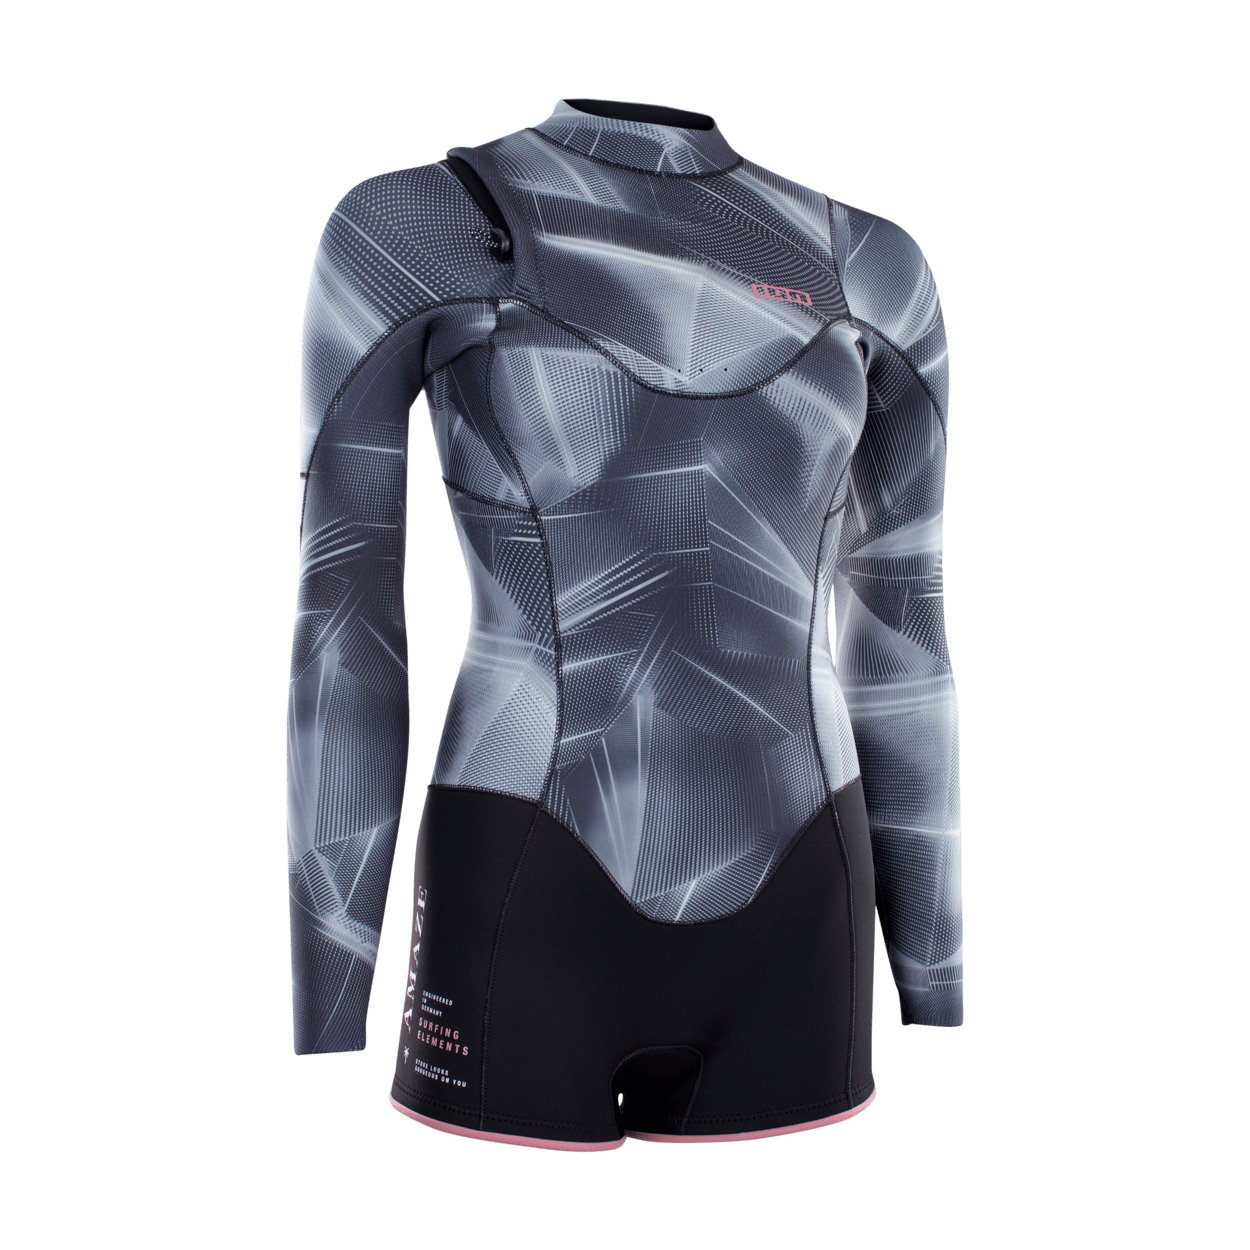 ION Amaze Shorty LS 2.0 NZ DL 2021 - Worthing Watersports - 9008415953615 - Wetsuits - ION Water